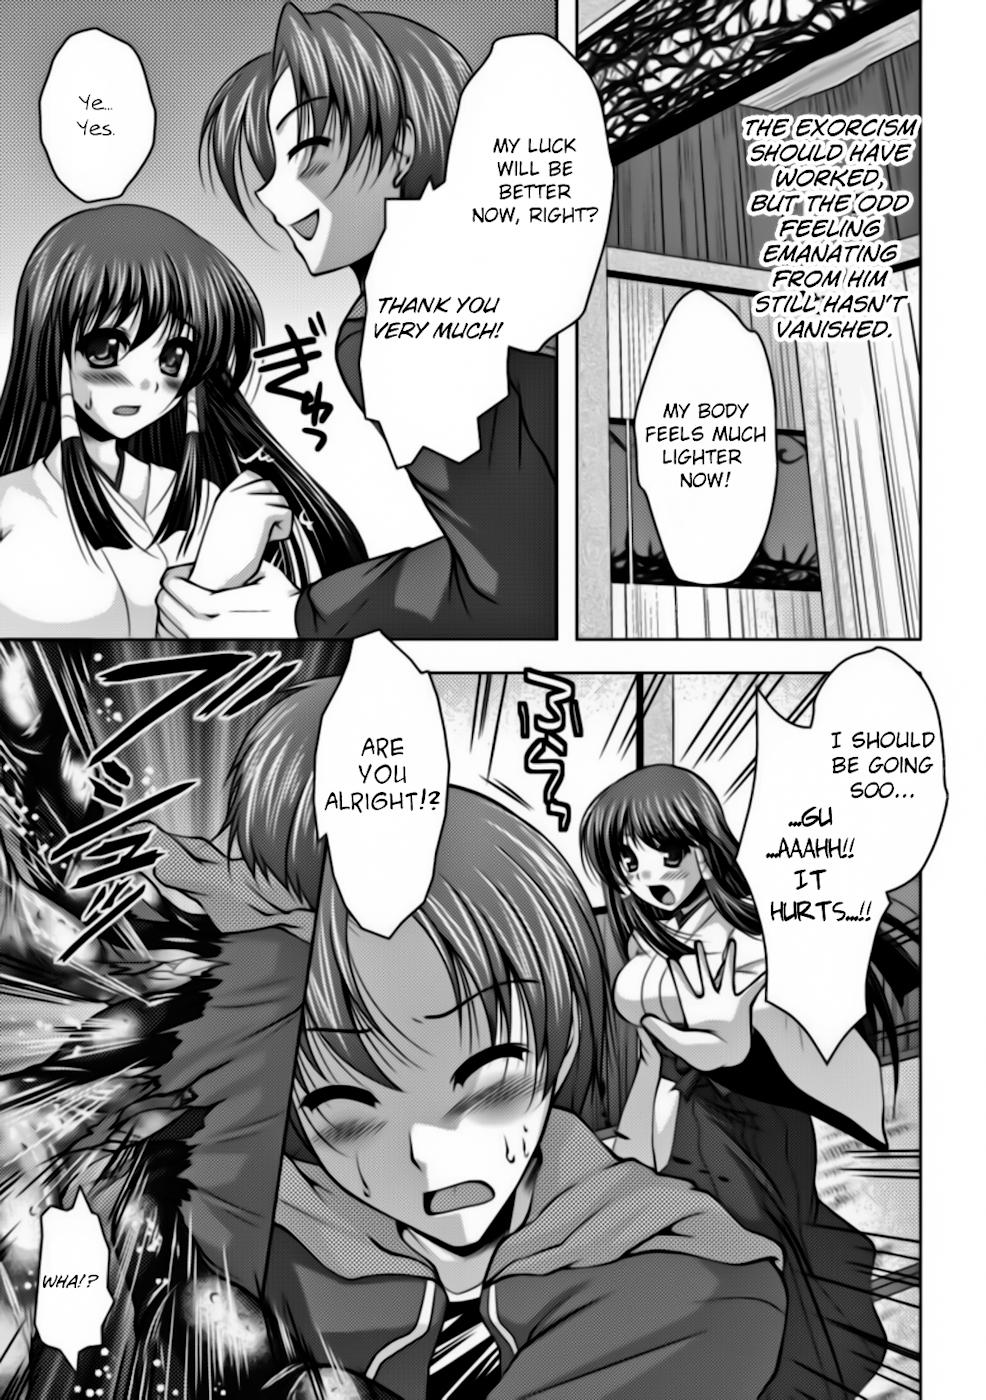 Outdoor Chakusou Play Ch. 4 "Exorcist Miko" Free - Page 4